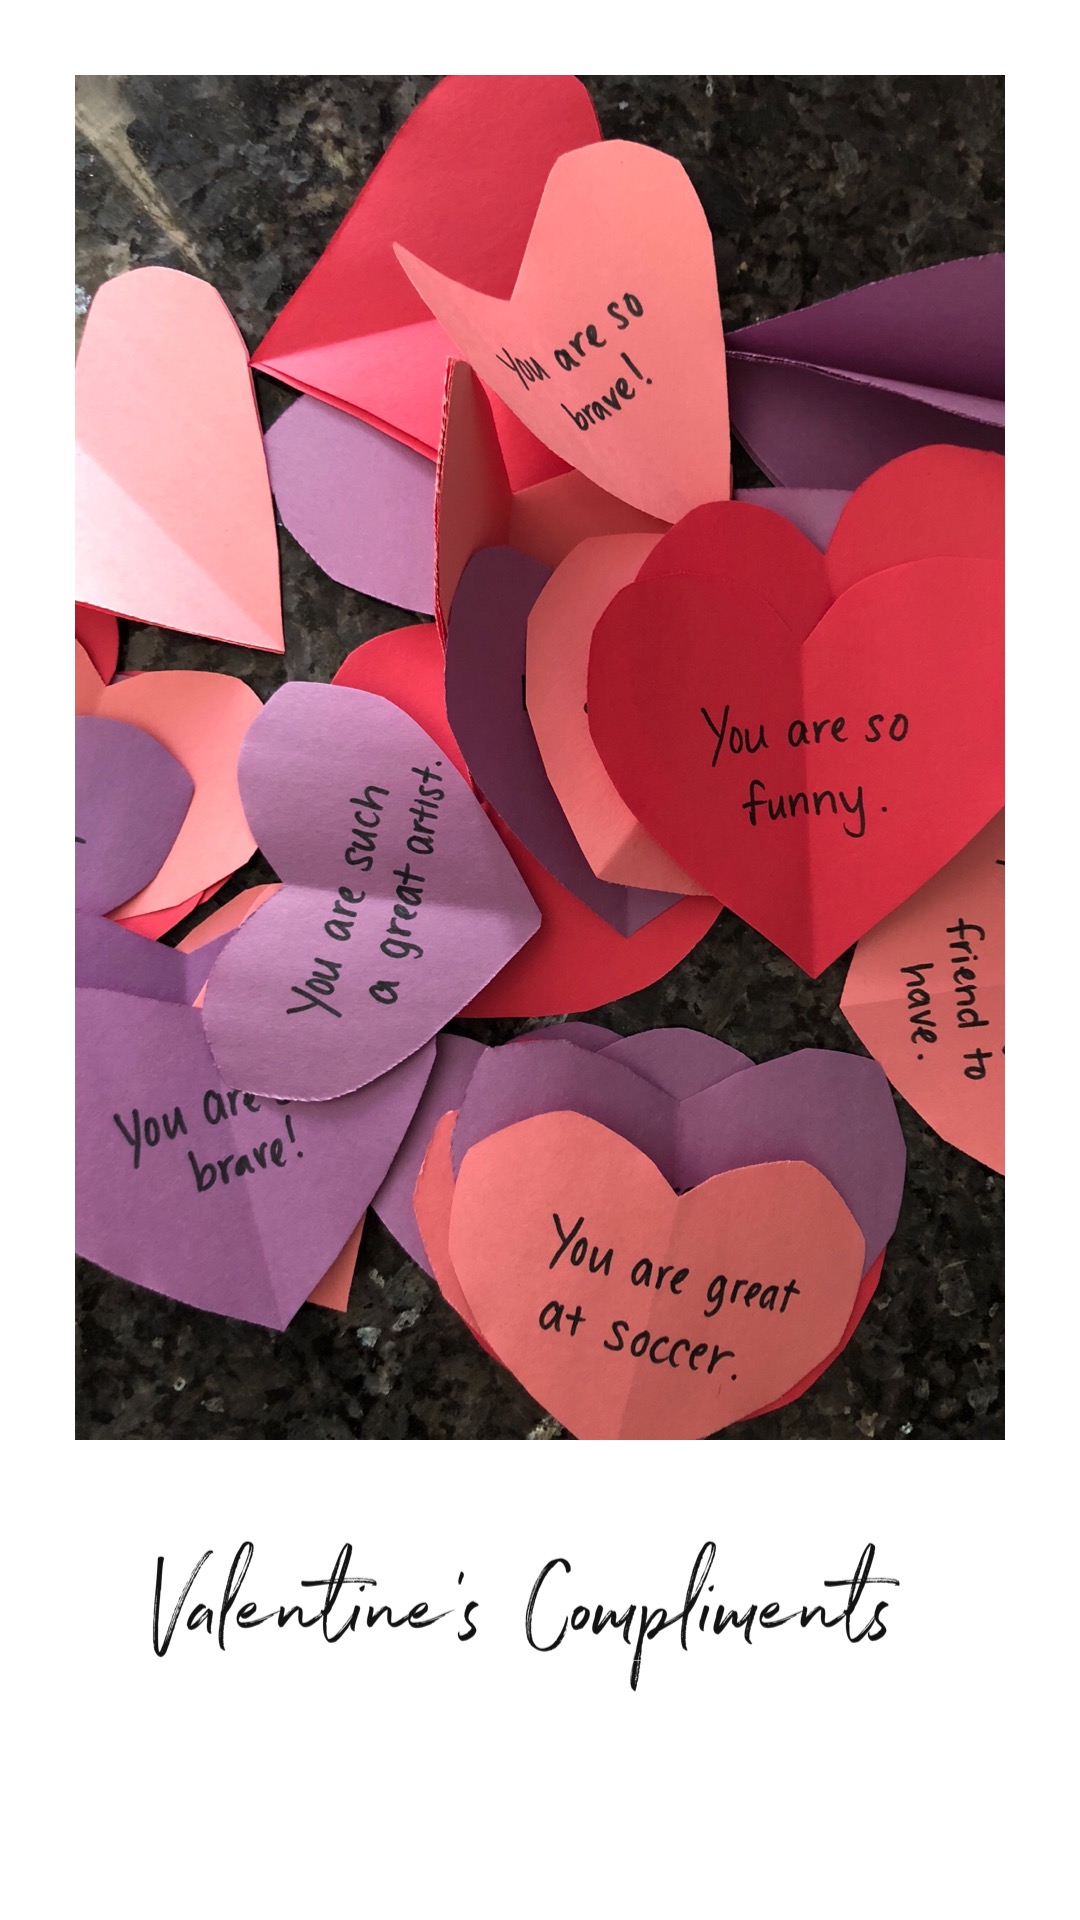 Paper hearts with words written on them - compliments for kids for Valentine's Day